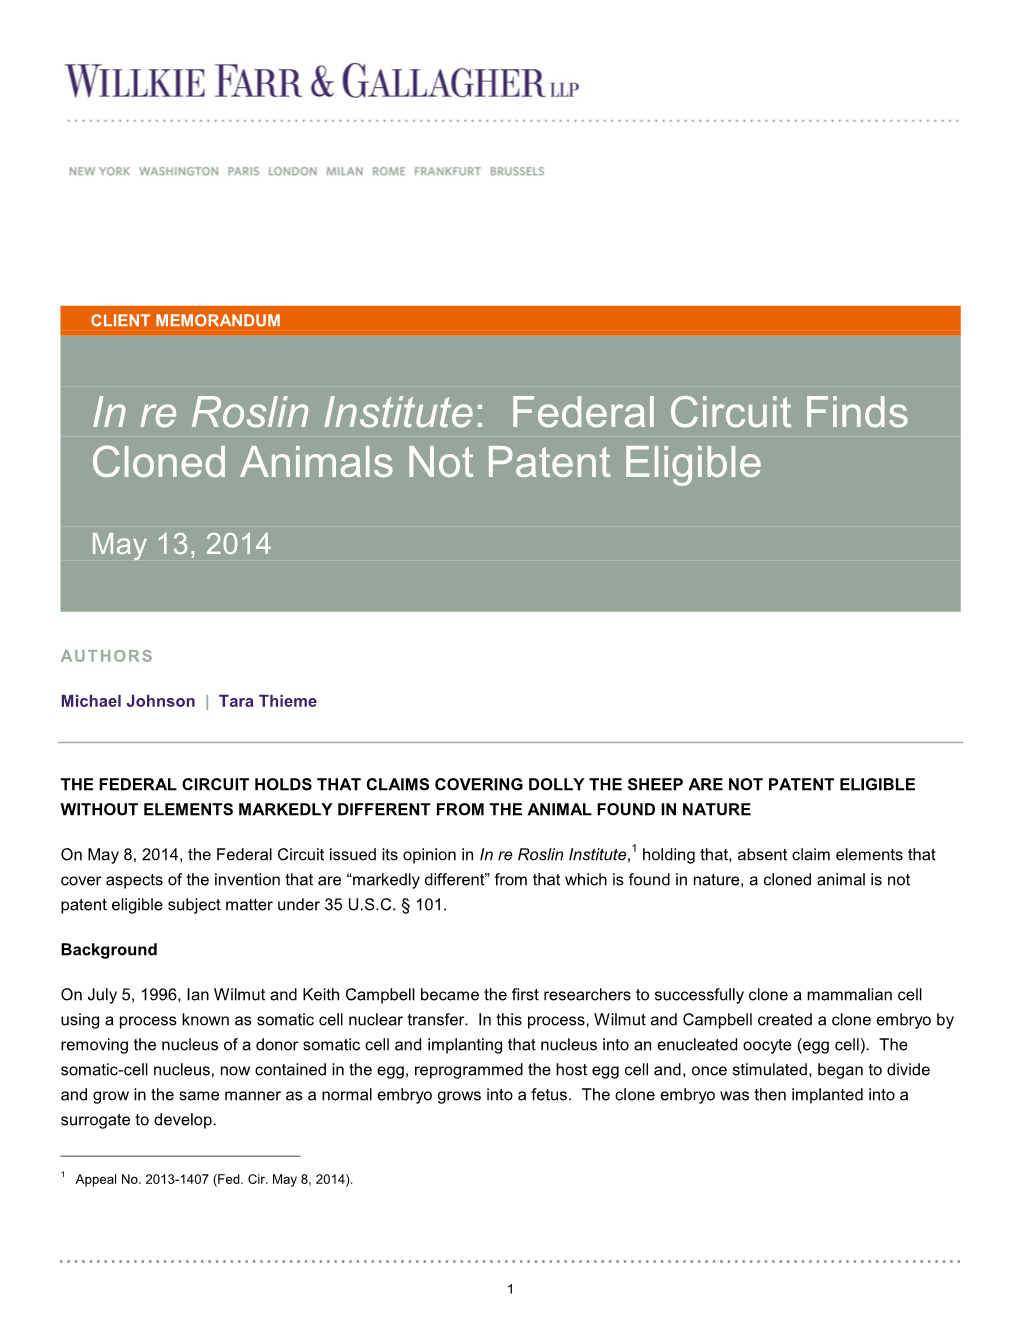 In Re Roslin Institute: Federal Circuit Finds Cloned Animals Not Patent Eligible